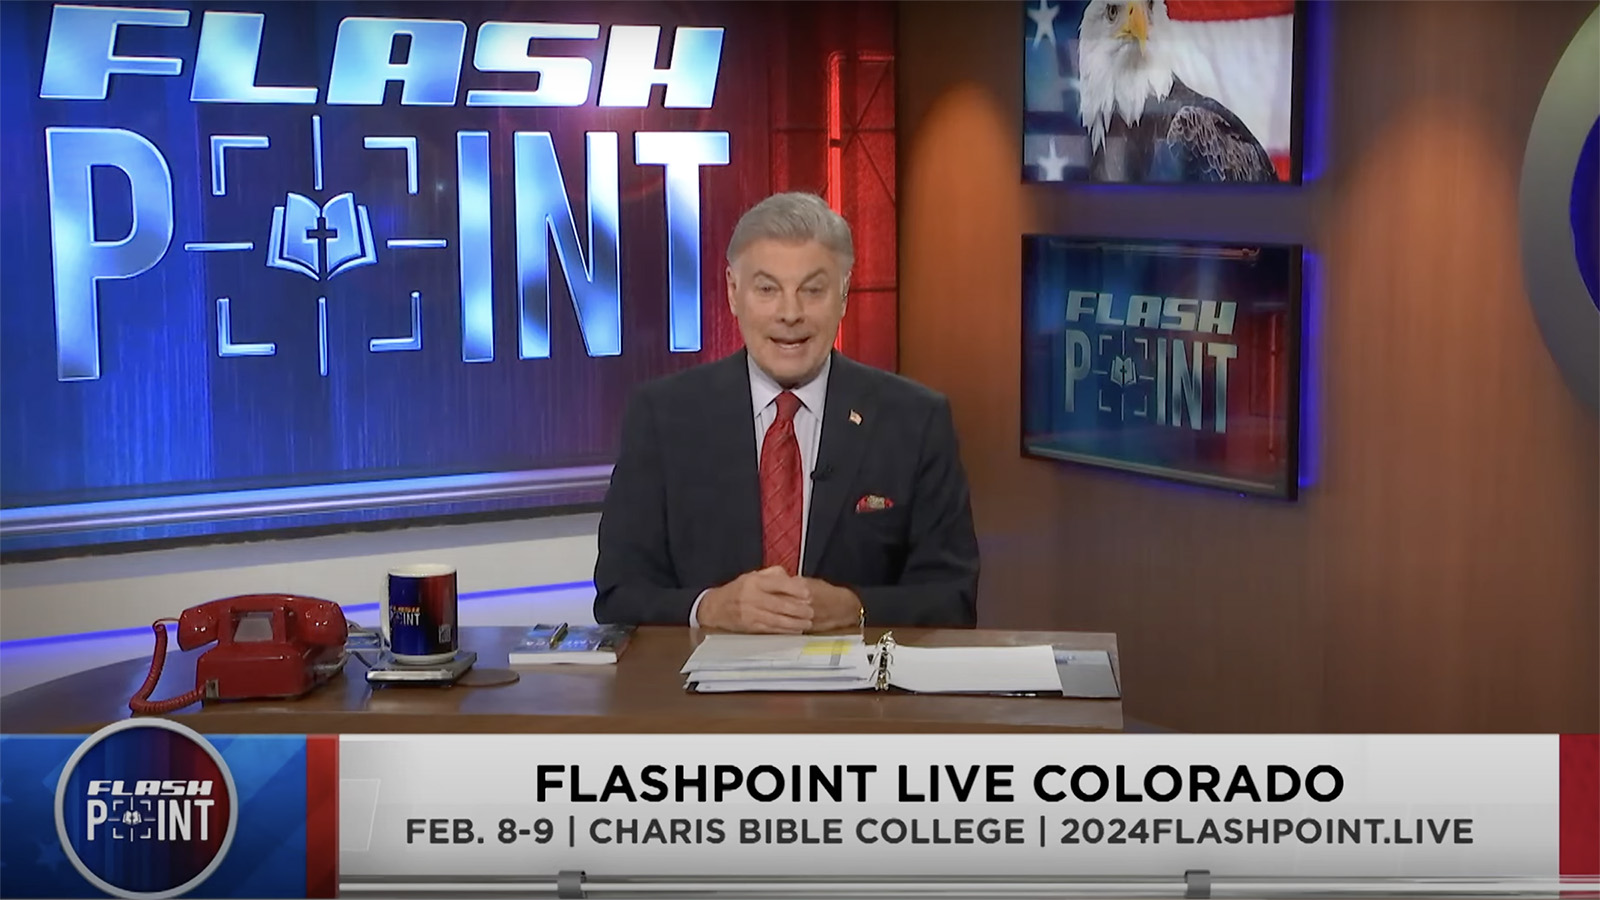 Lance Wallnau in a promotional video for an upcoming FlashPoint LIVE event at Charis Bible College. (Video screen grab)